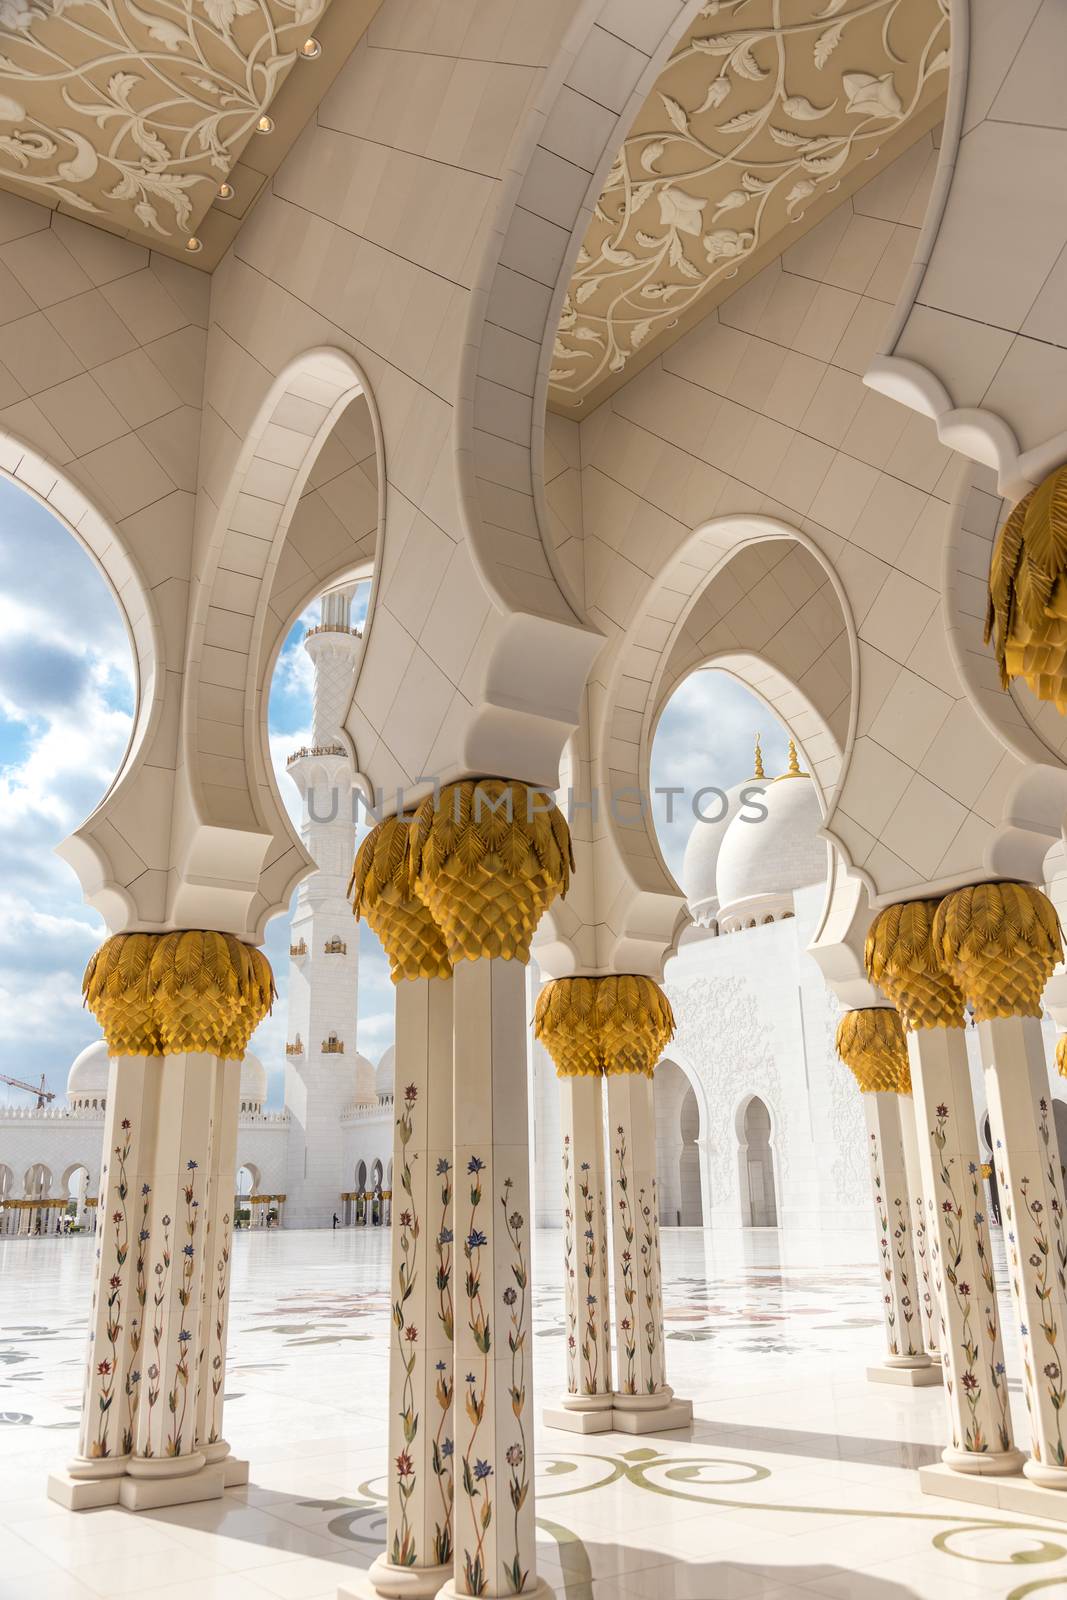 Architectural details from Sheikh Zayed Grand Mosque in Abu Dhabi, United Arab Emirates.